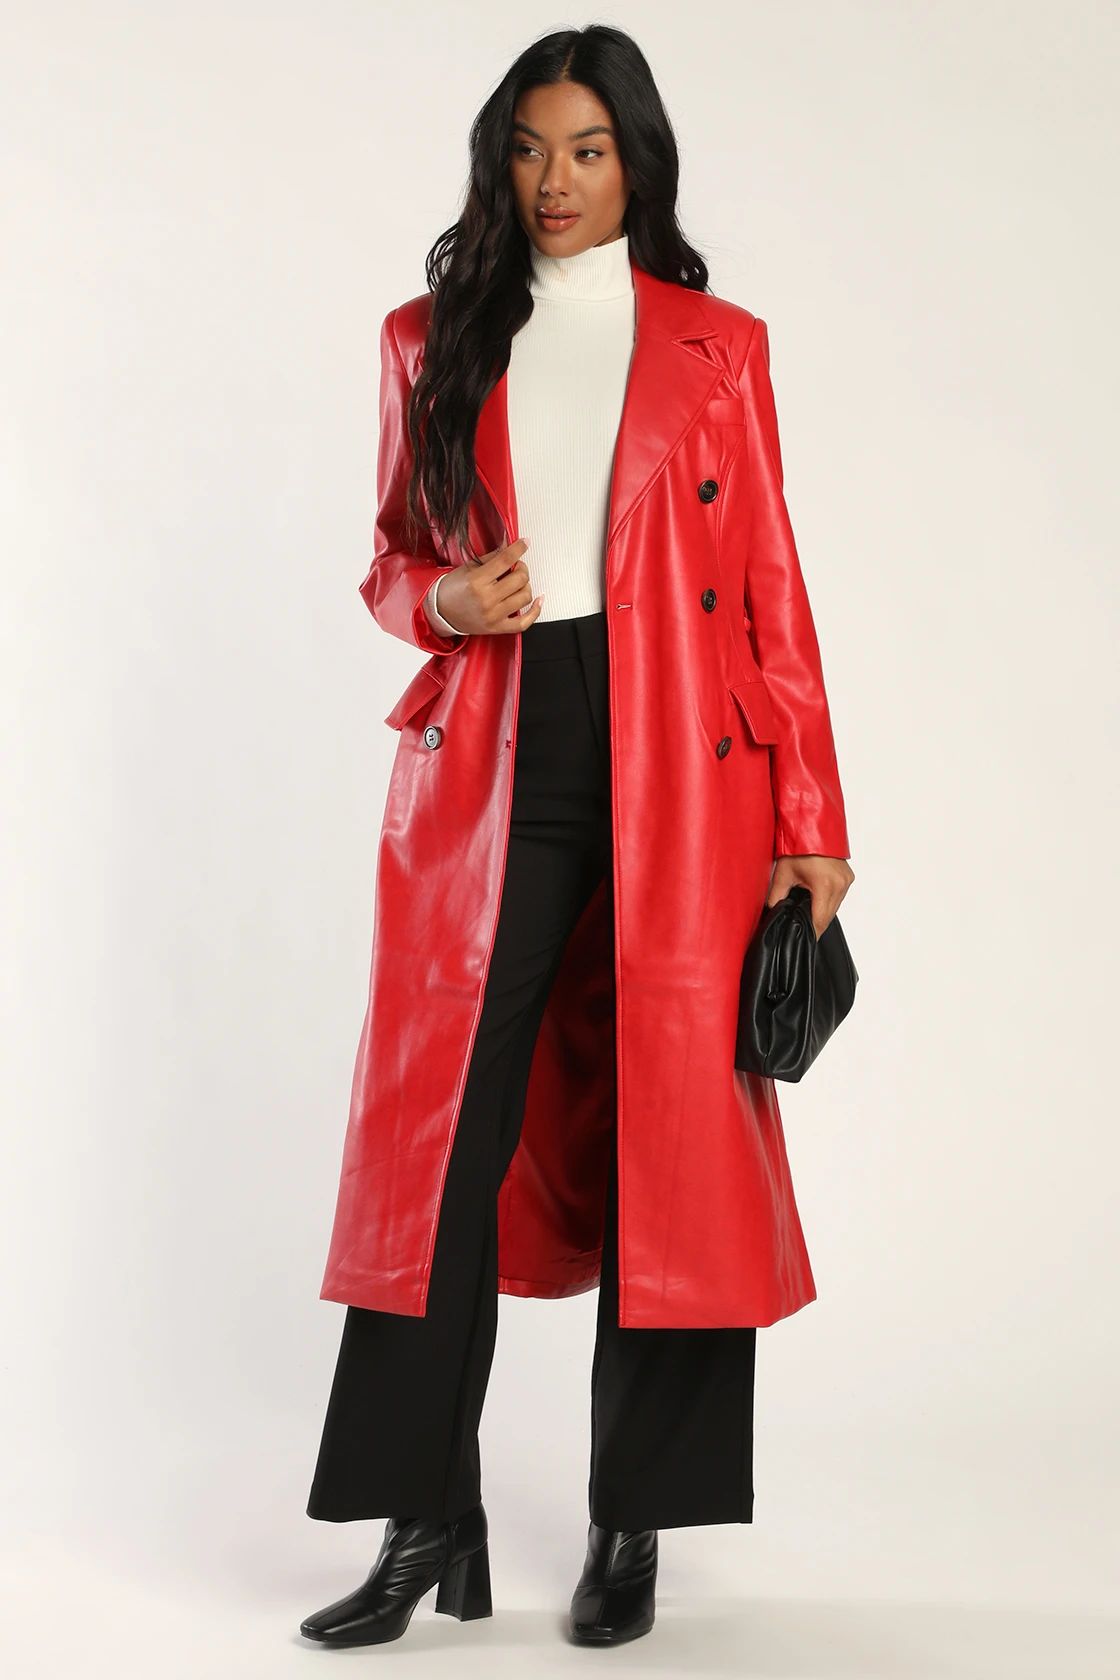 Style Storm Red Vegan Leather Double Double-Breasted Coat | Lulus (US)